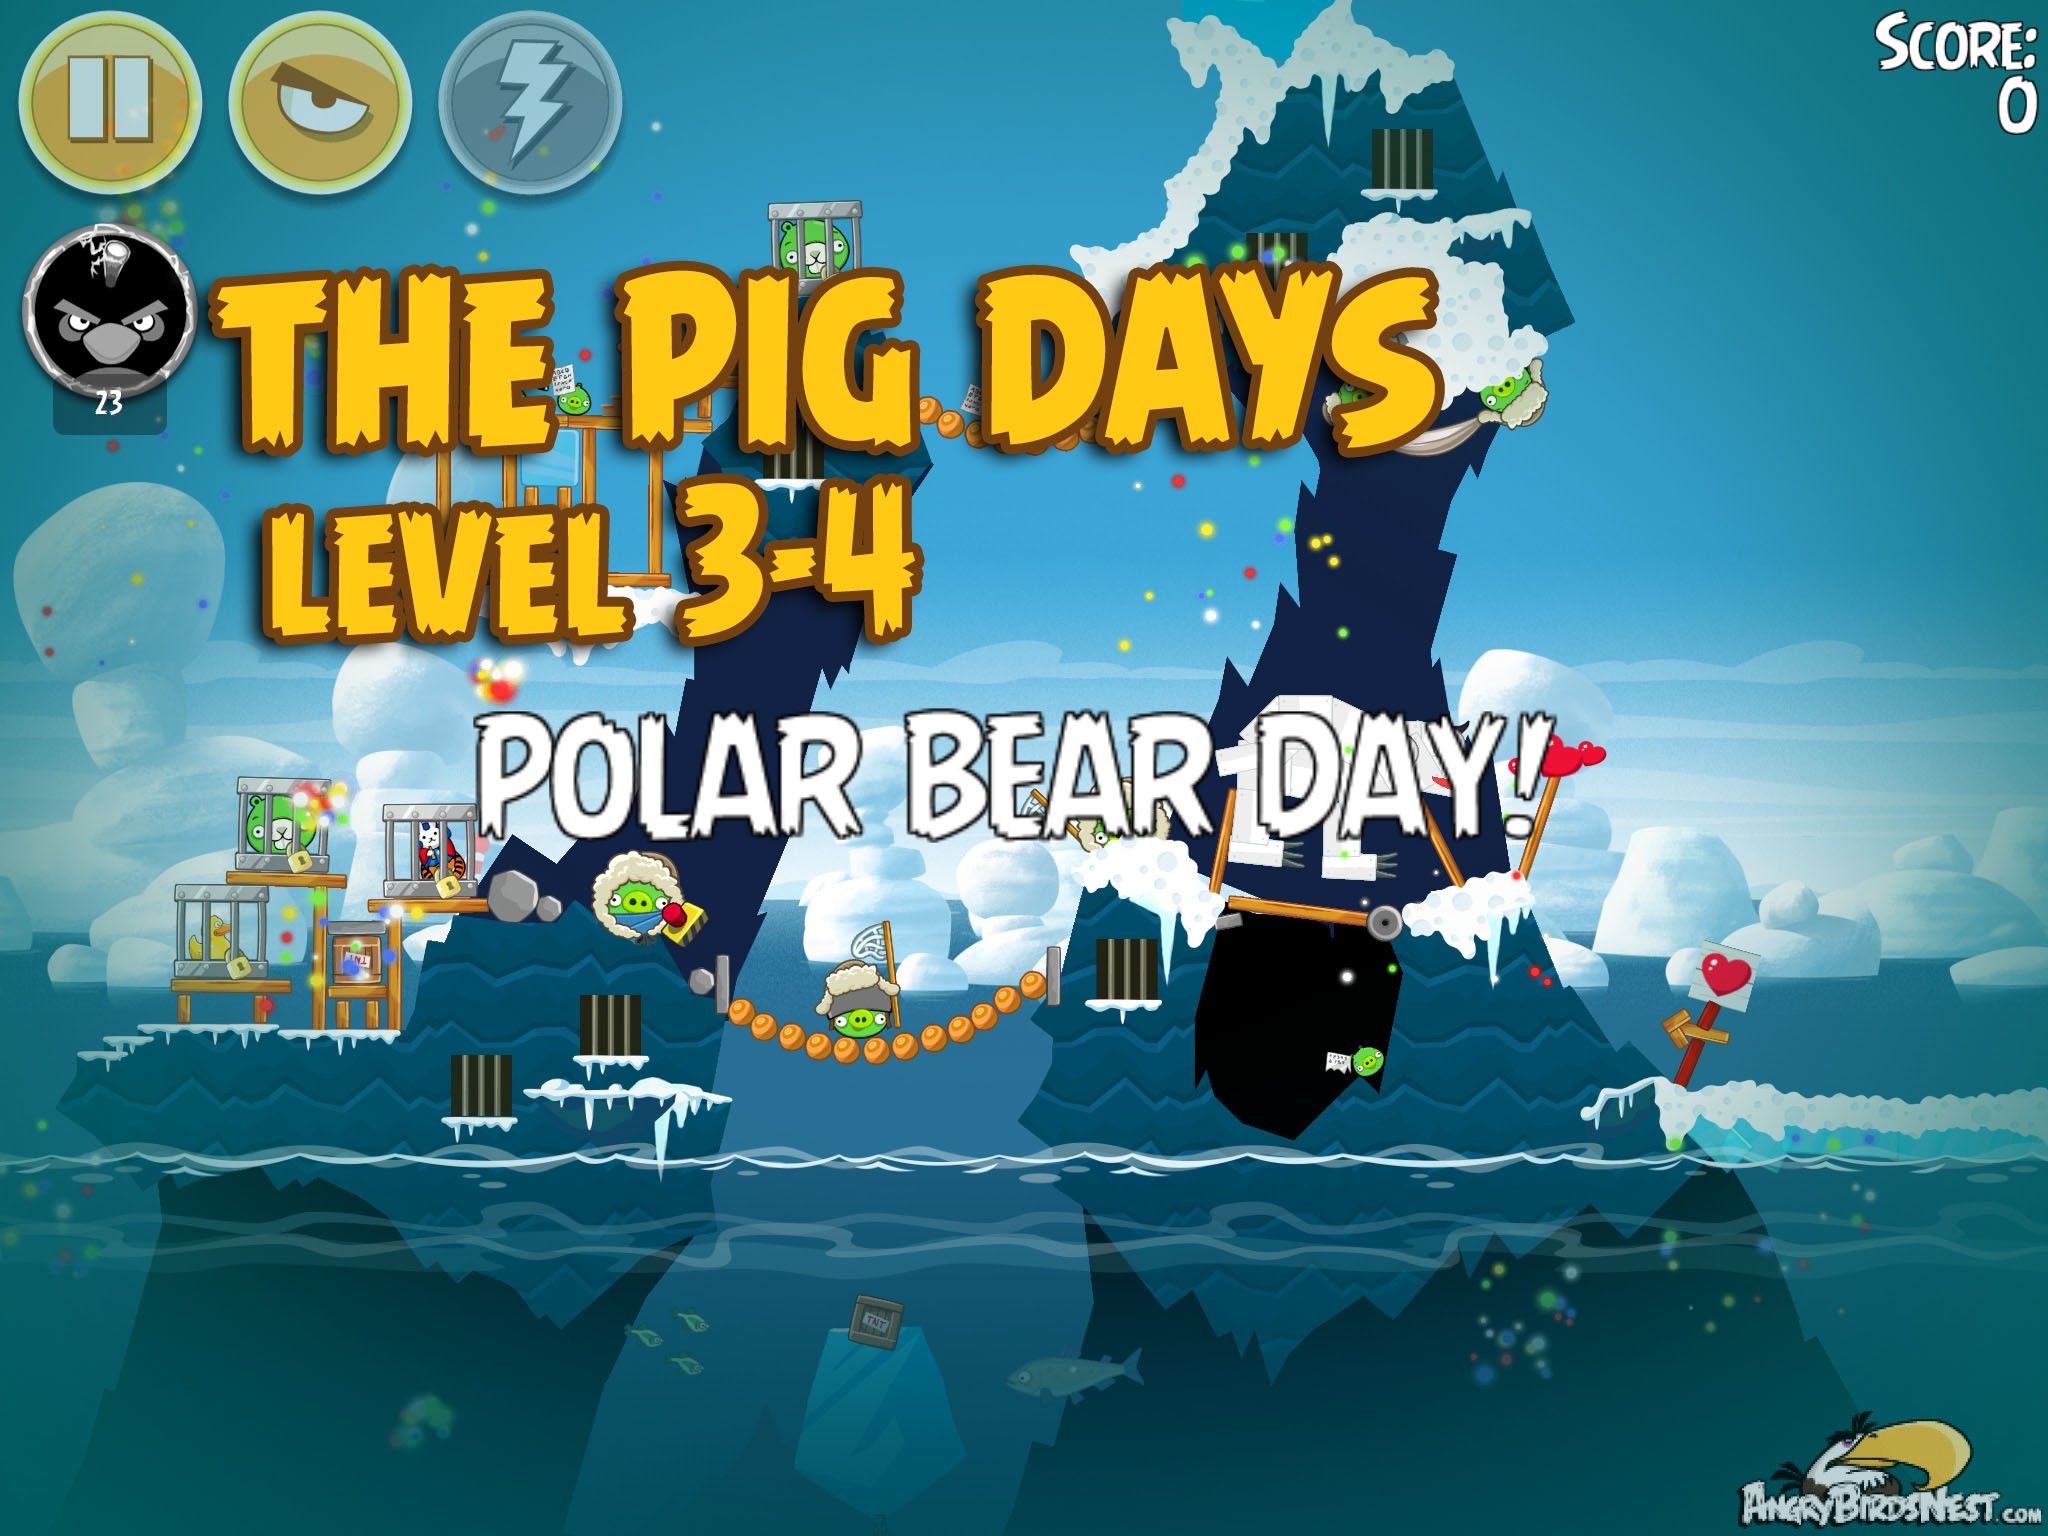 Angry Birds Seasons The Pig Days Level 3-4